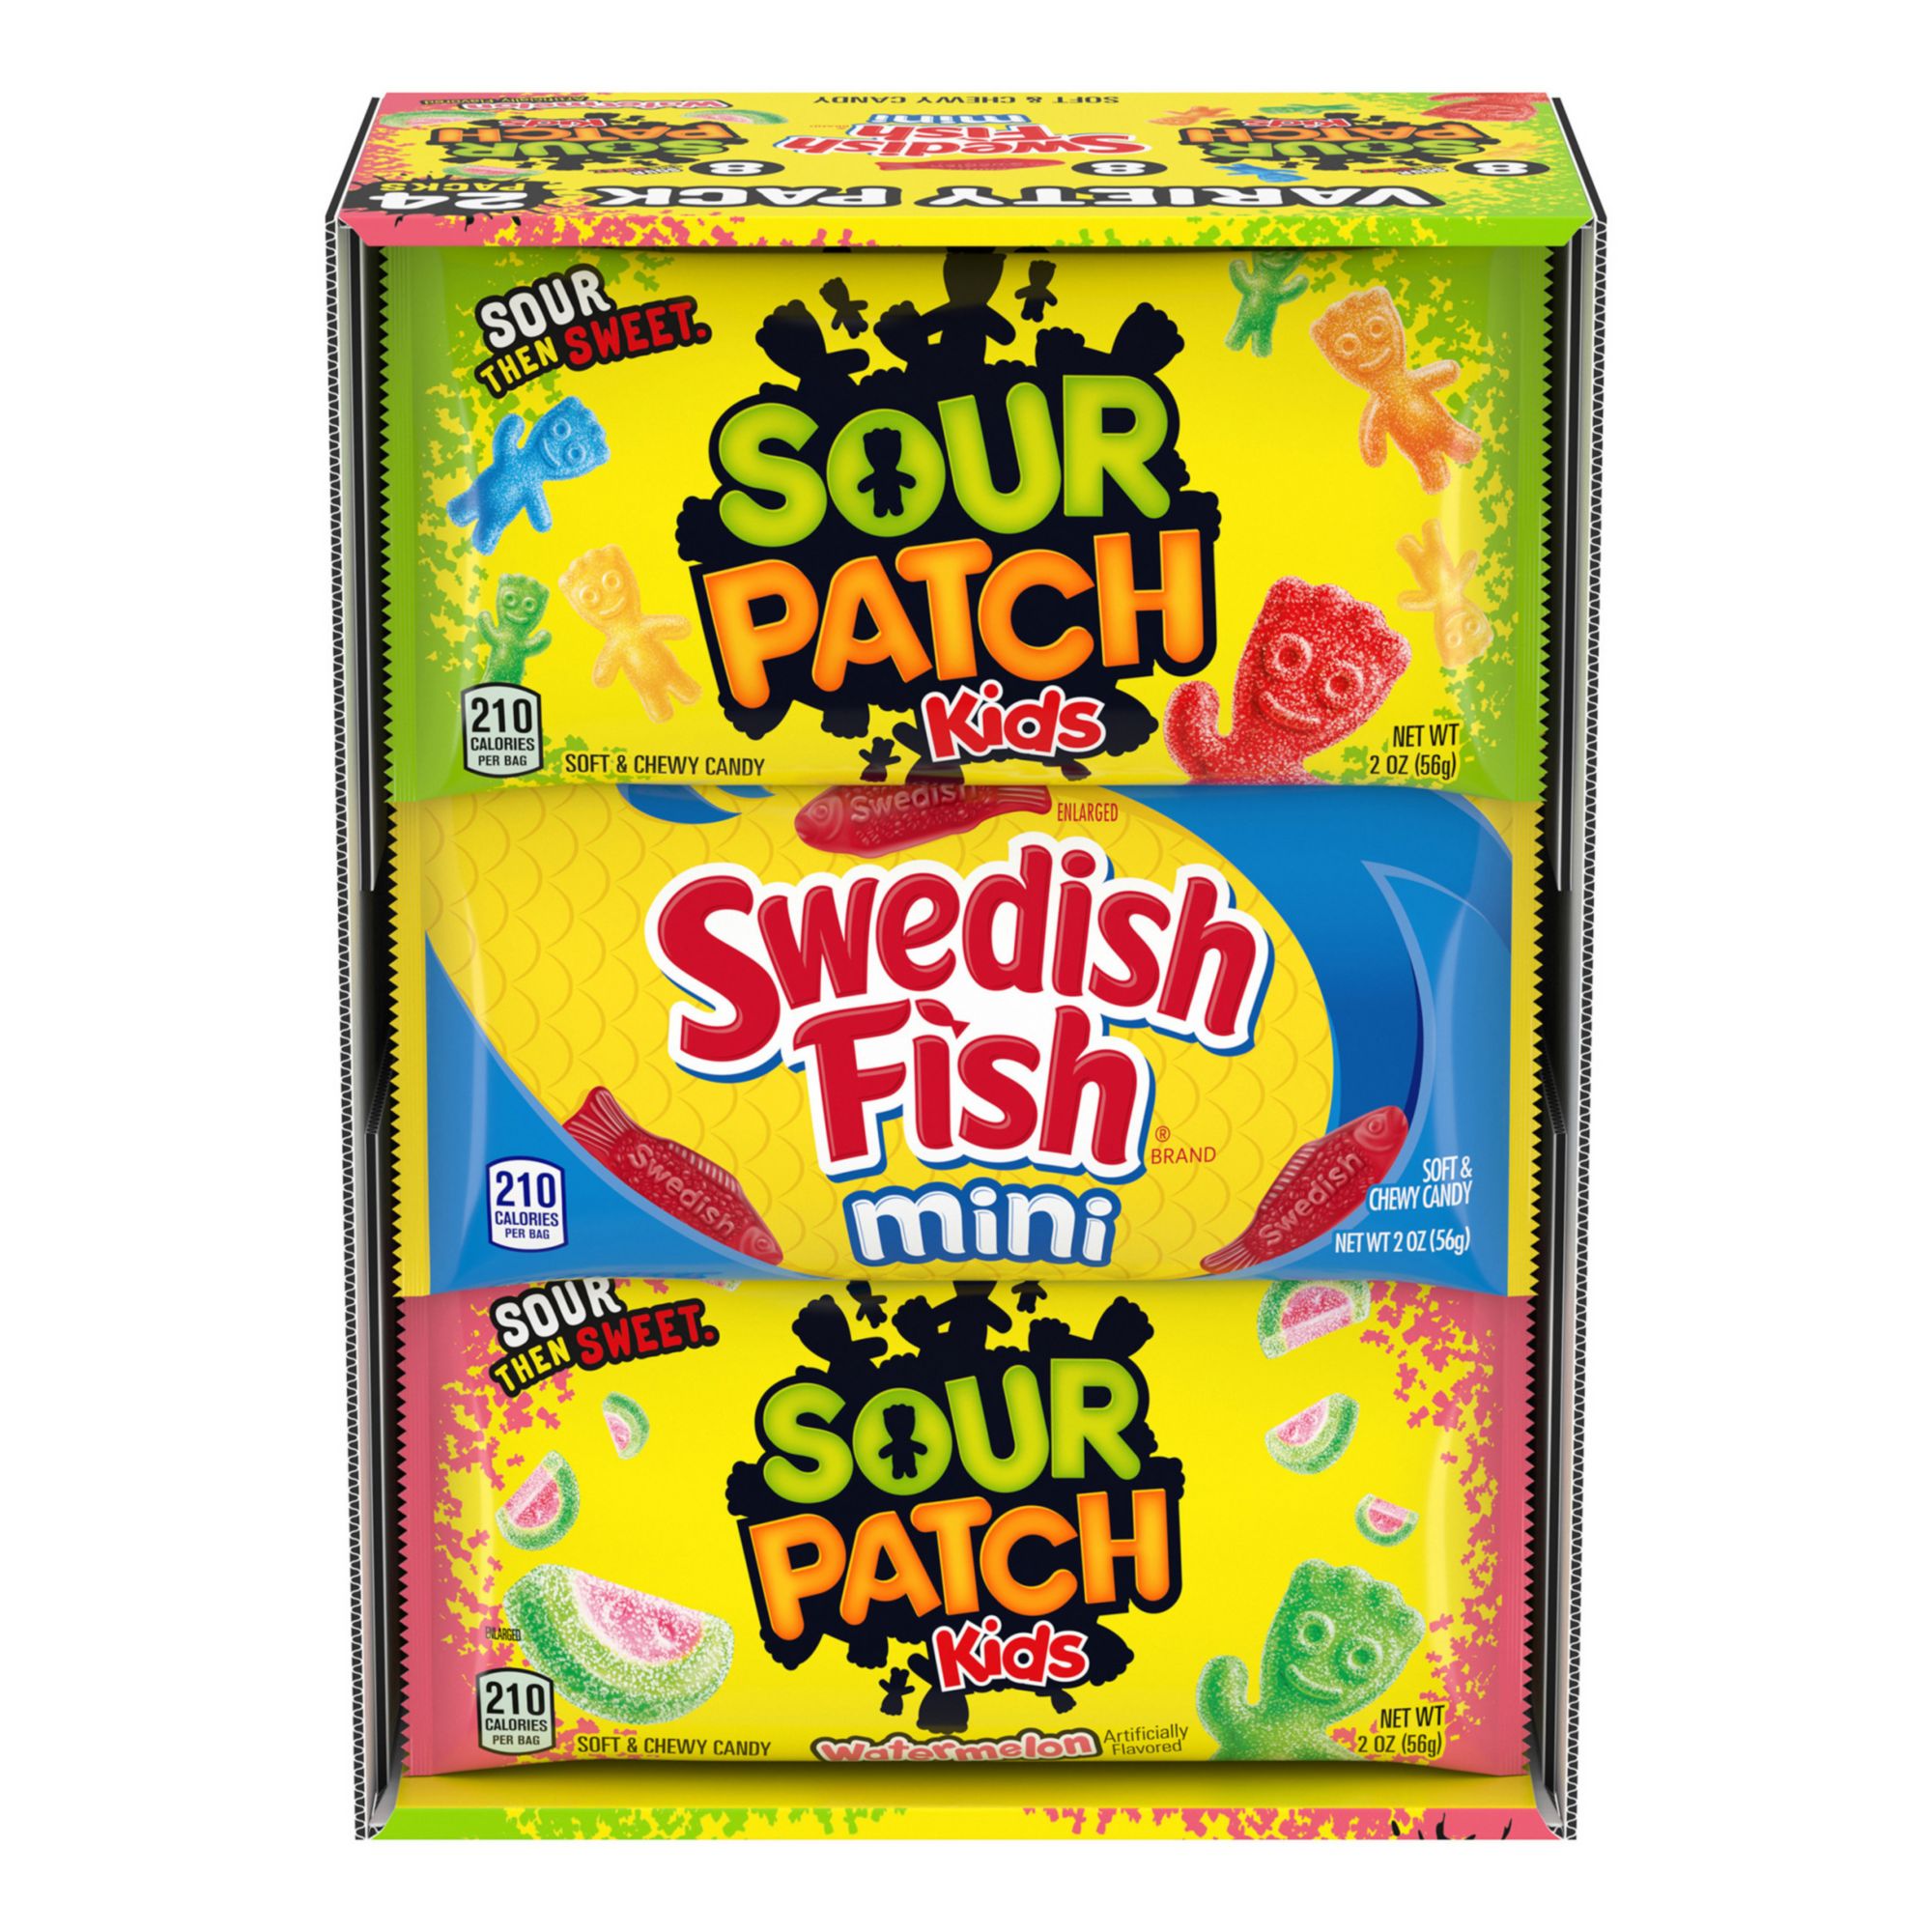 Sour Patch Kids & Swedish Fish Candy Variety Pack, 24 pk./2 oz.